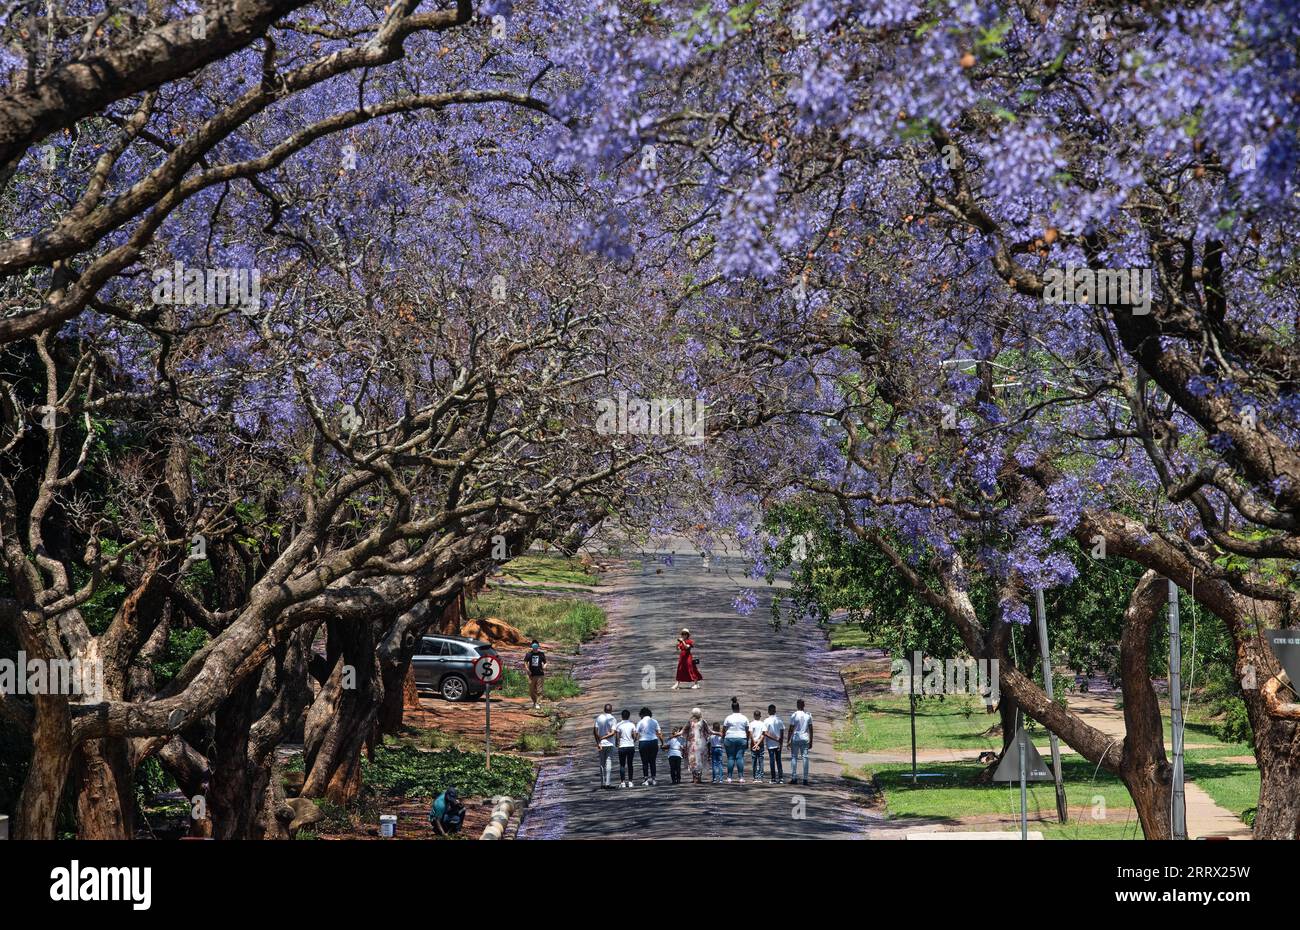 230818 -- PRETORIA, Aug. 18, 2023 -- People walk under the jacaranda trees in Pretoria, South Africa on Oct. 17, 2020. South Africa, to hold the 15th BRICS summit this month, is the southernmost country in Africa. It is the only country in the world with three capitals, with Pretoria as its administrative capital, Cape Town as its legislative capital and Bloemfontein the judicial capital. Other major cities include Johannesburg and Durban. South Africa has a pleasant climate and famous tourist destinations such as Cape of Good Hope, Kruger National Park and the Table Mountain, attracting a lar Stock Photo